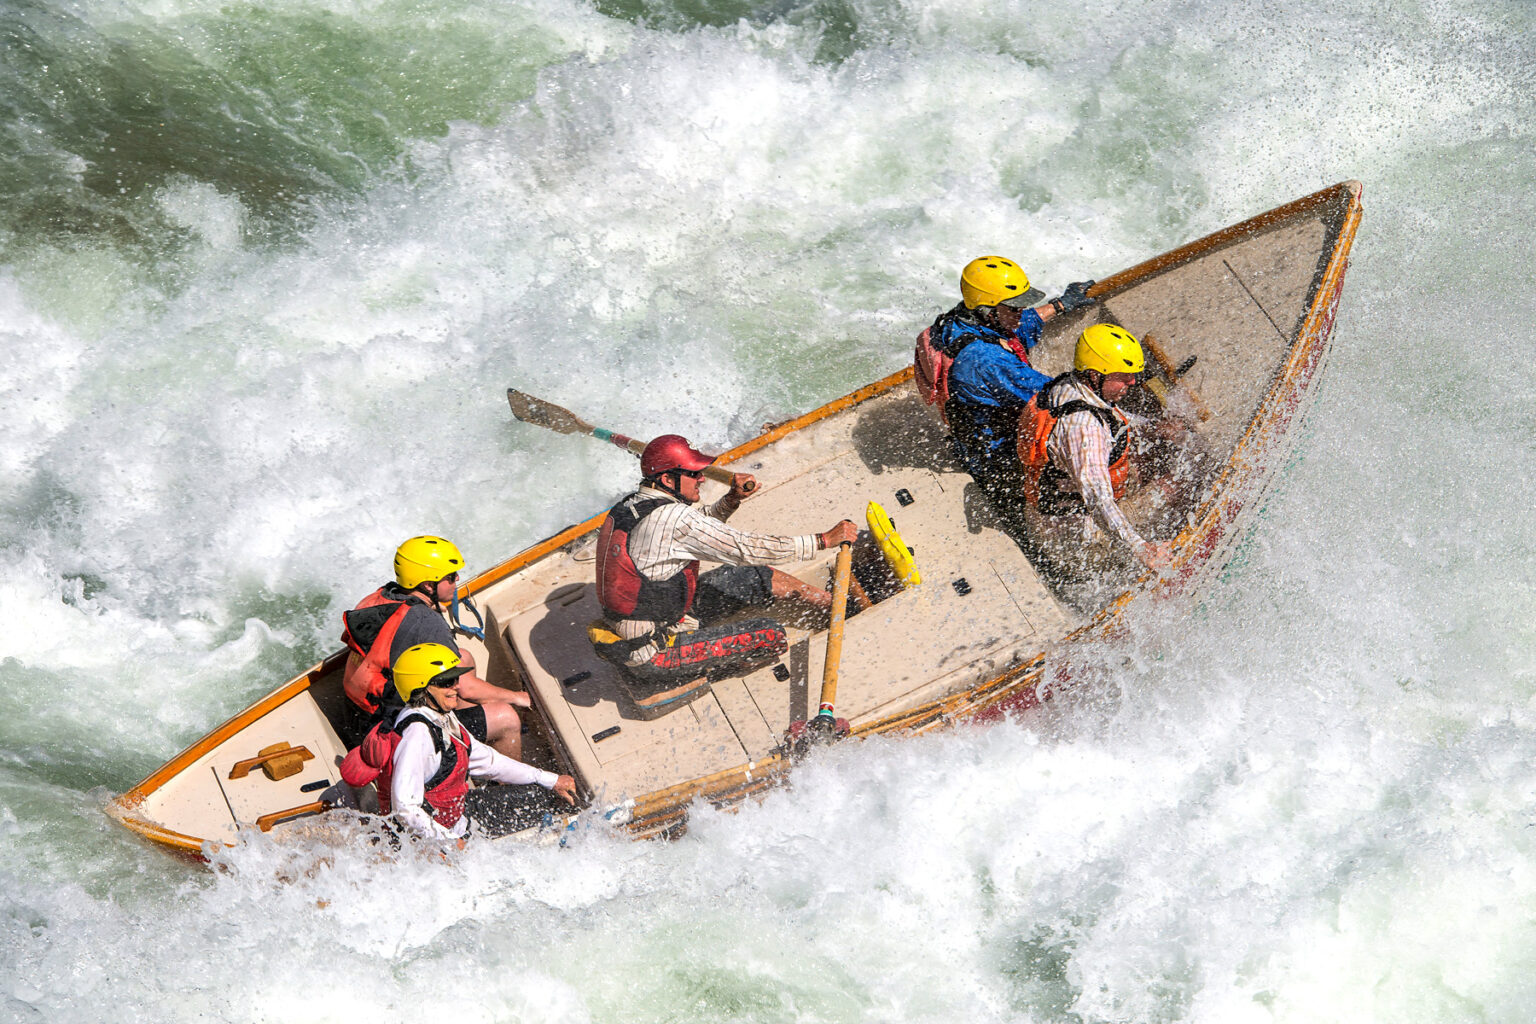 A dory rowed by a guide with four guests crashes through a frothy rapid on the Colorado River in Grand Canyon